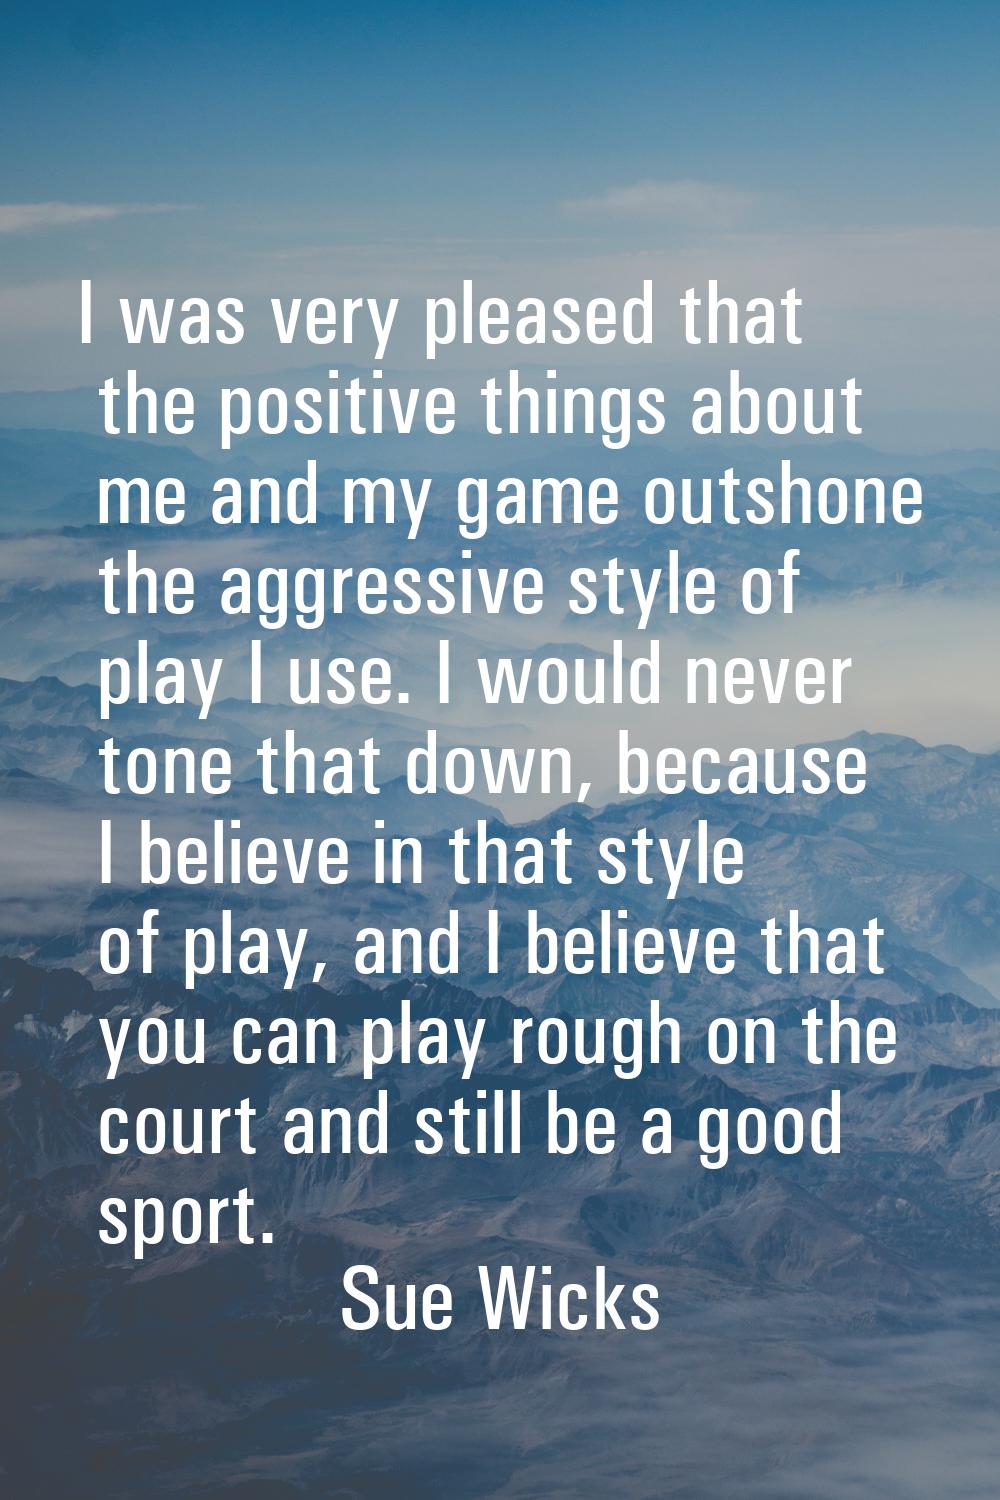 I was very pleased that the positive things about me and my game outshone the aggressive style of p